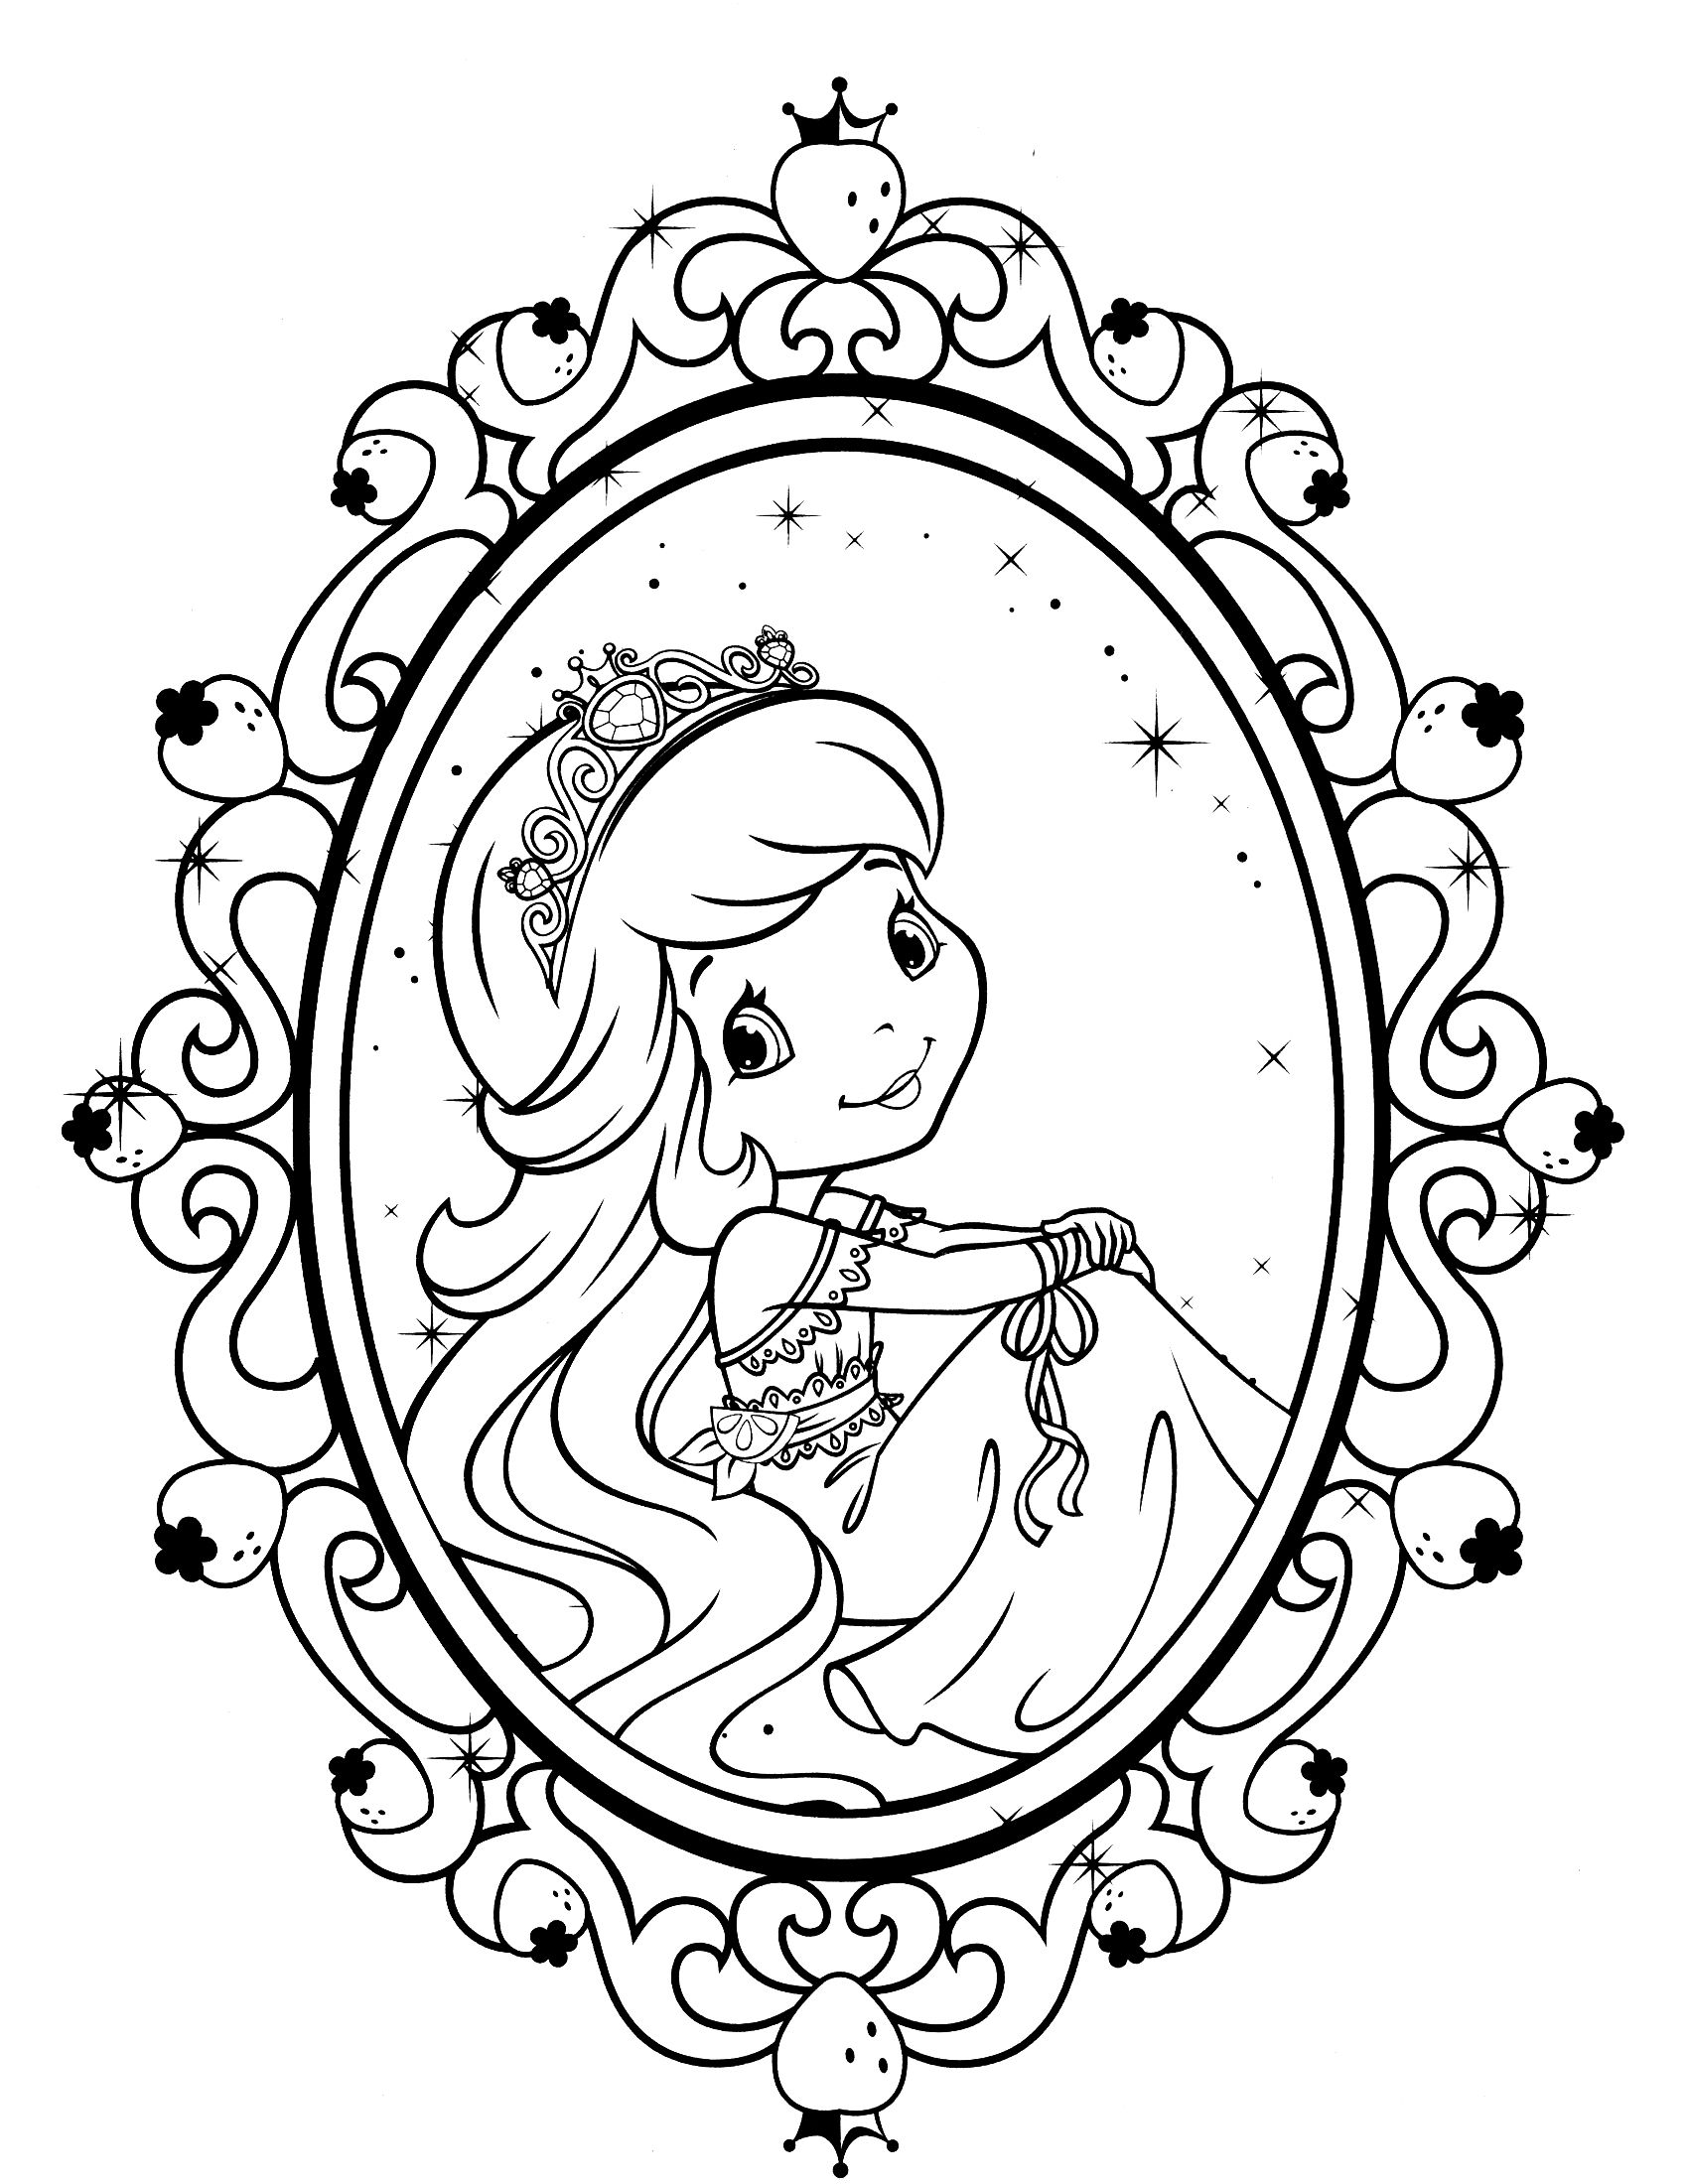 Printable Strawberry Shortcake Coloring Pages Pdf - Coloring Pages Of Strawberry Shortcake